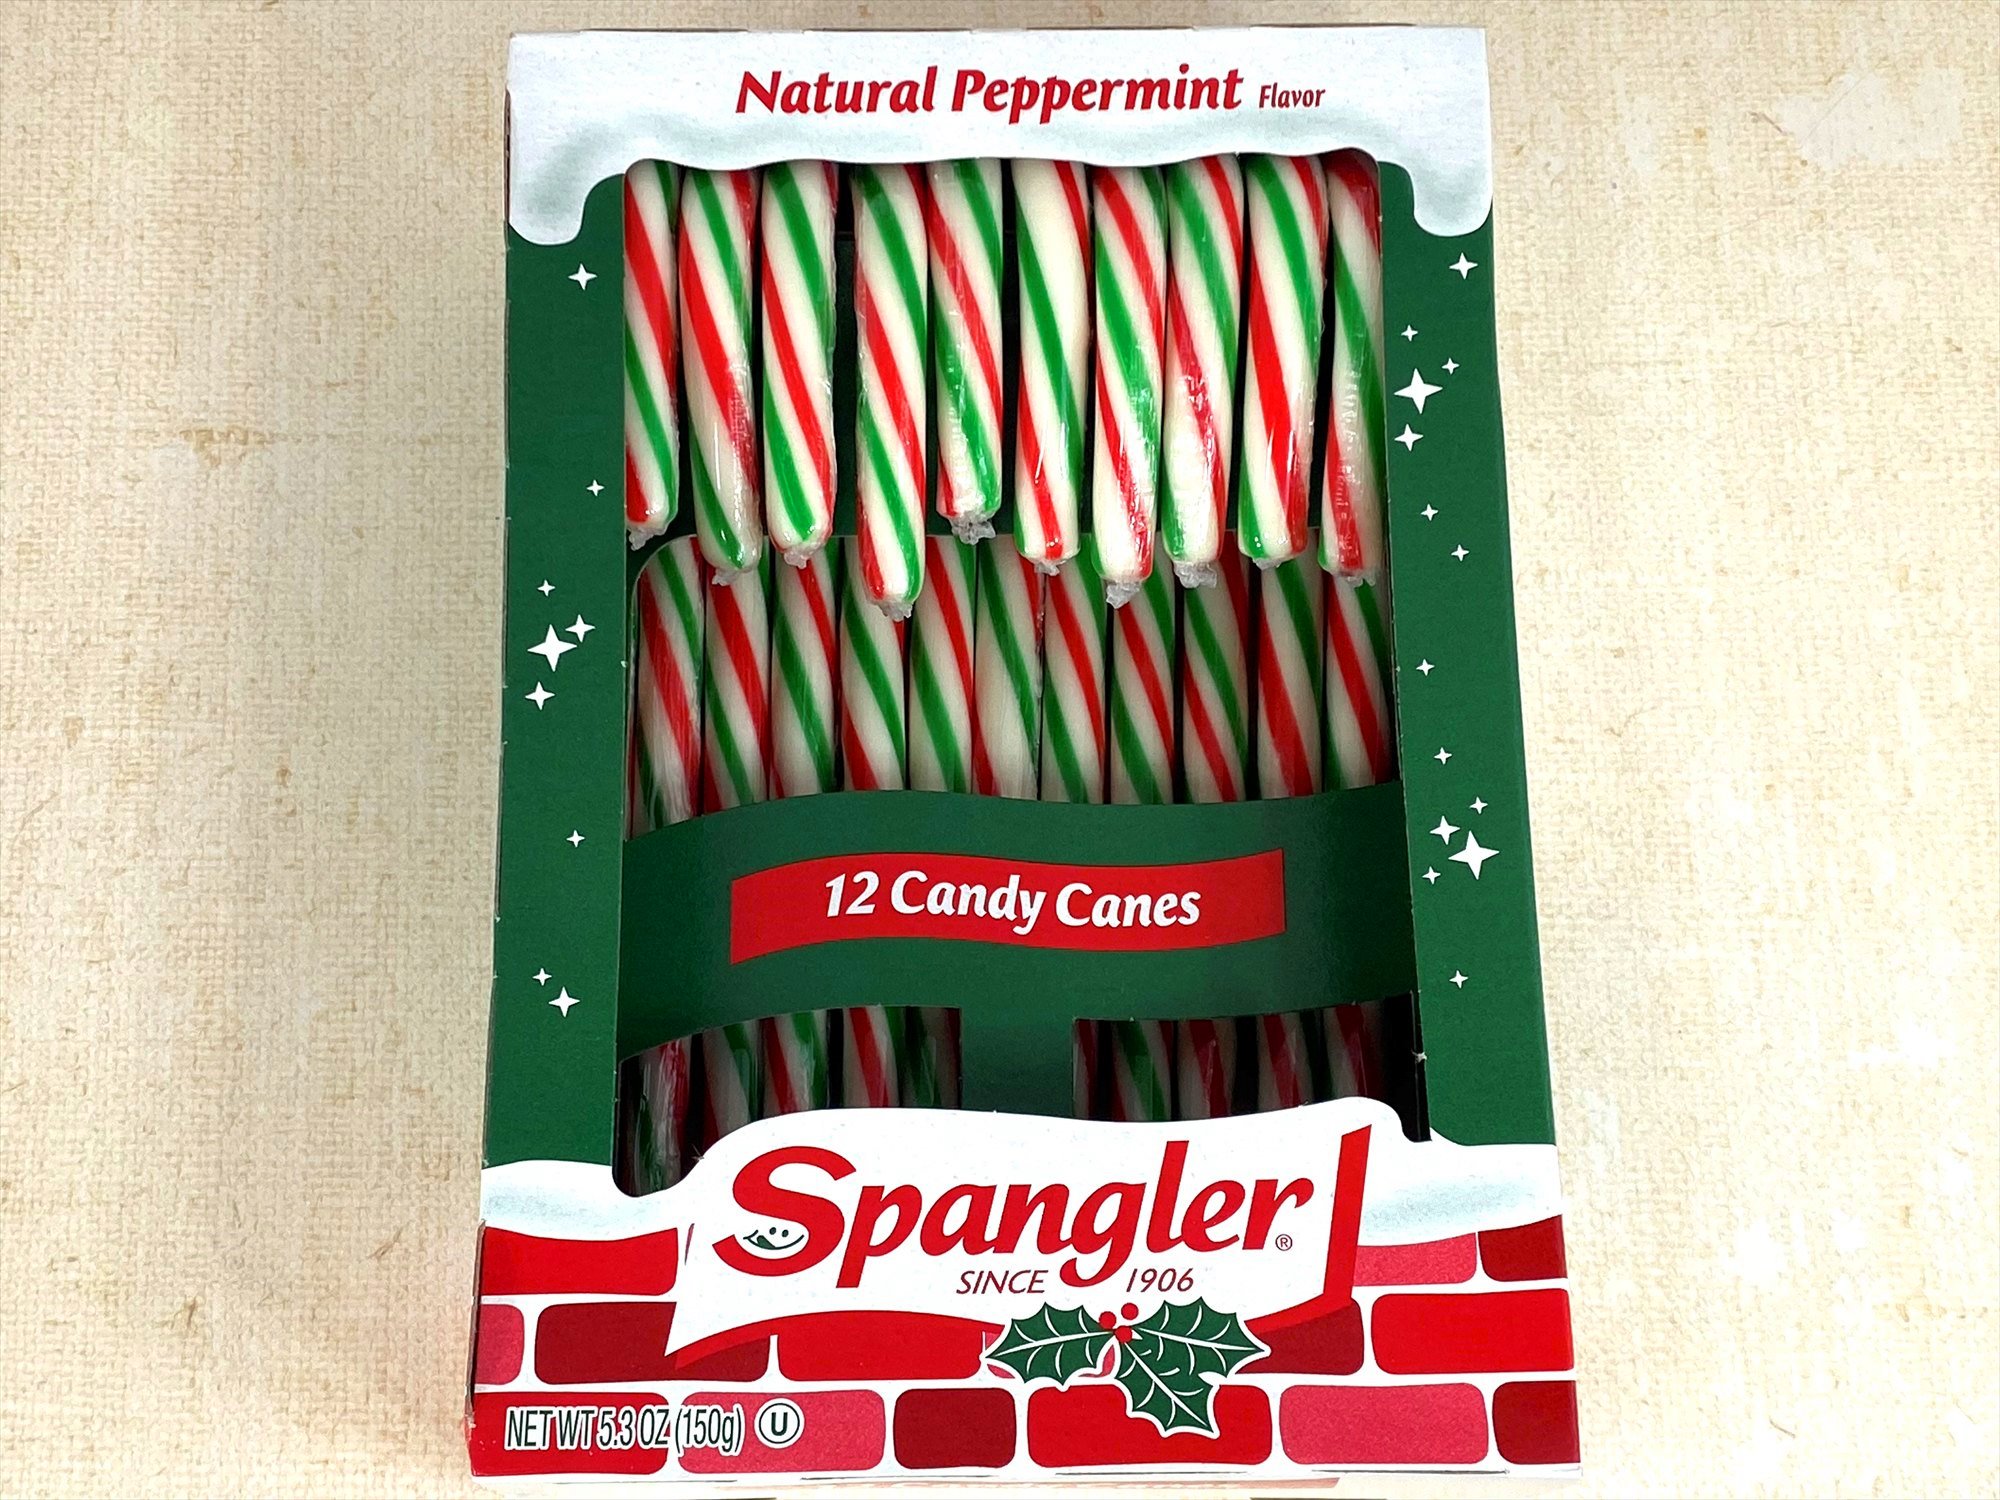 Spangler Candy Canes Natural Peppermint Flaver